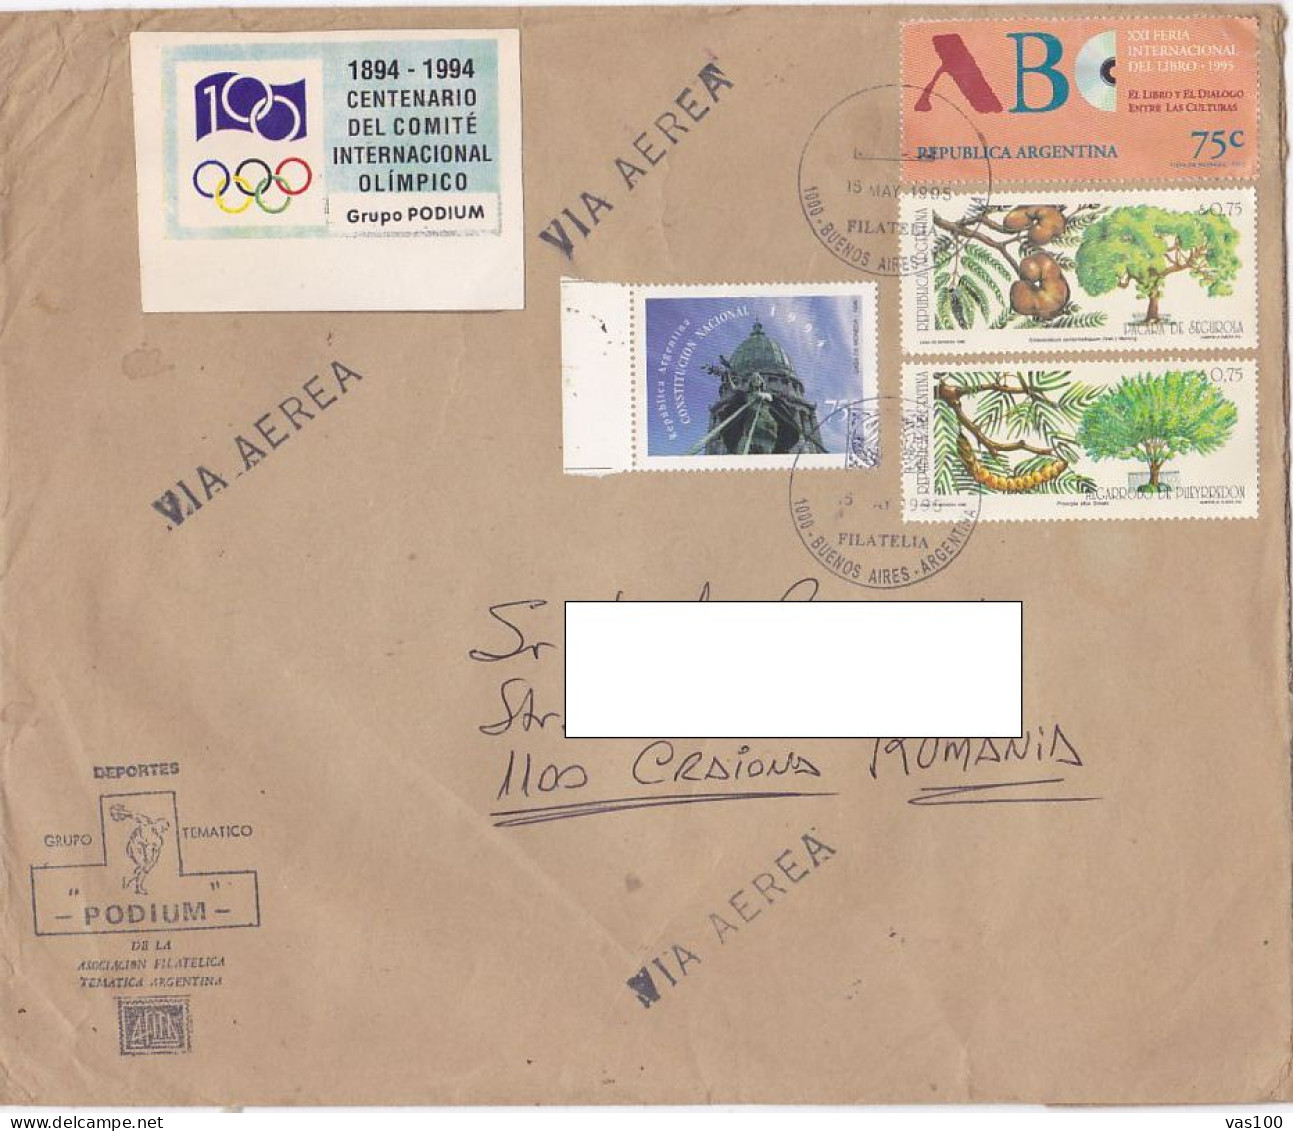 NATIONAL CONSTITUTION, BOOK FAIR, TREES, STAMPS ON COVER,1995, ARGENTINA - Covers & Documents